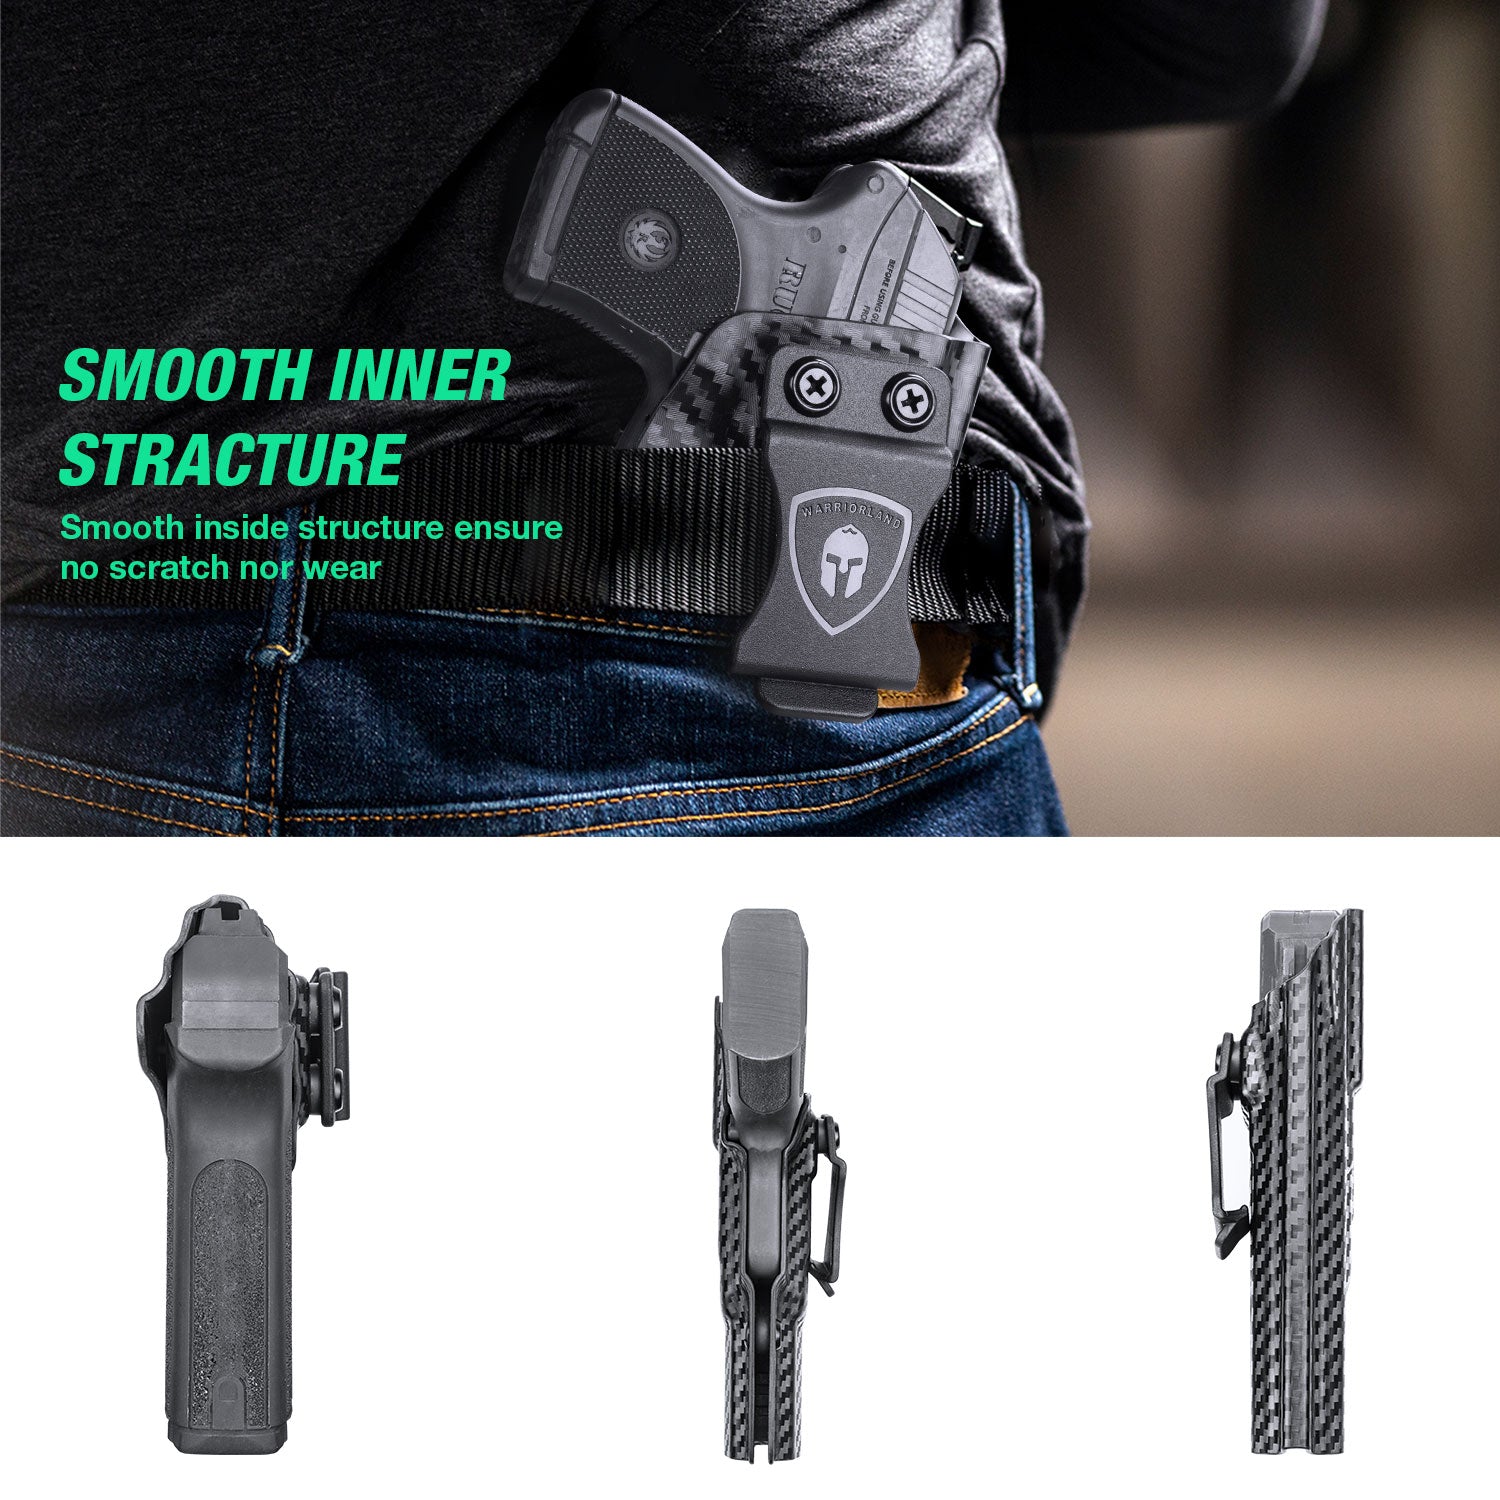 Ruger Security 9mm Compact Holster IWB Carbon Fiber Kydex | WARRIORLAND